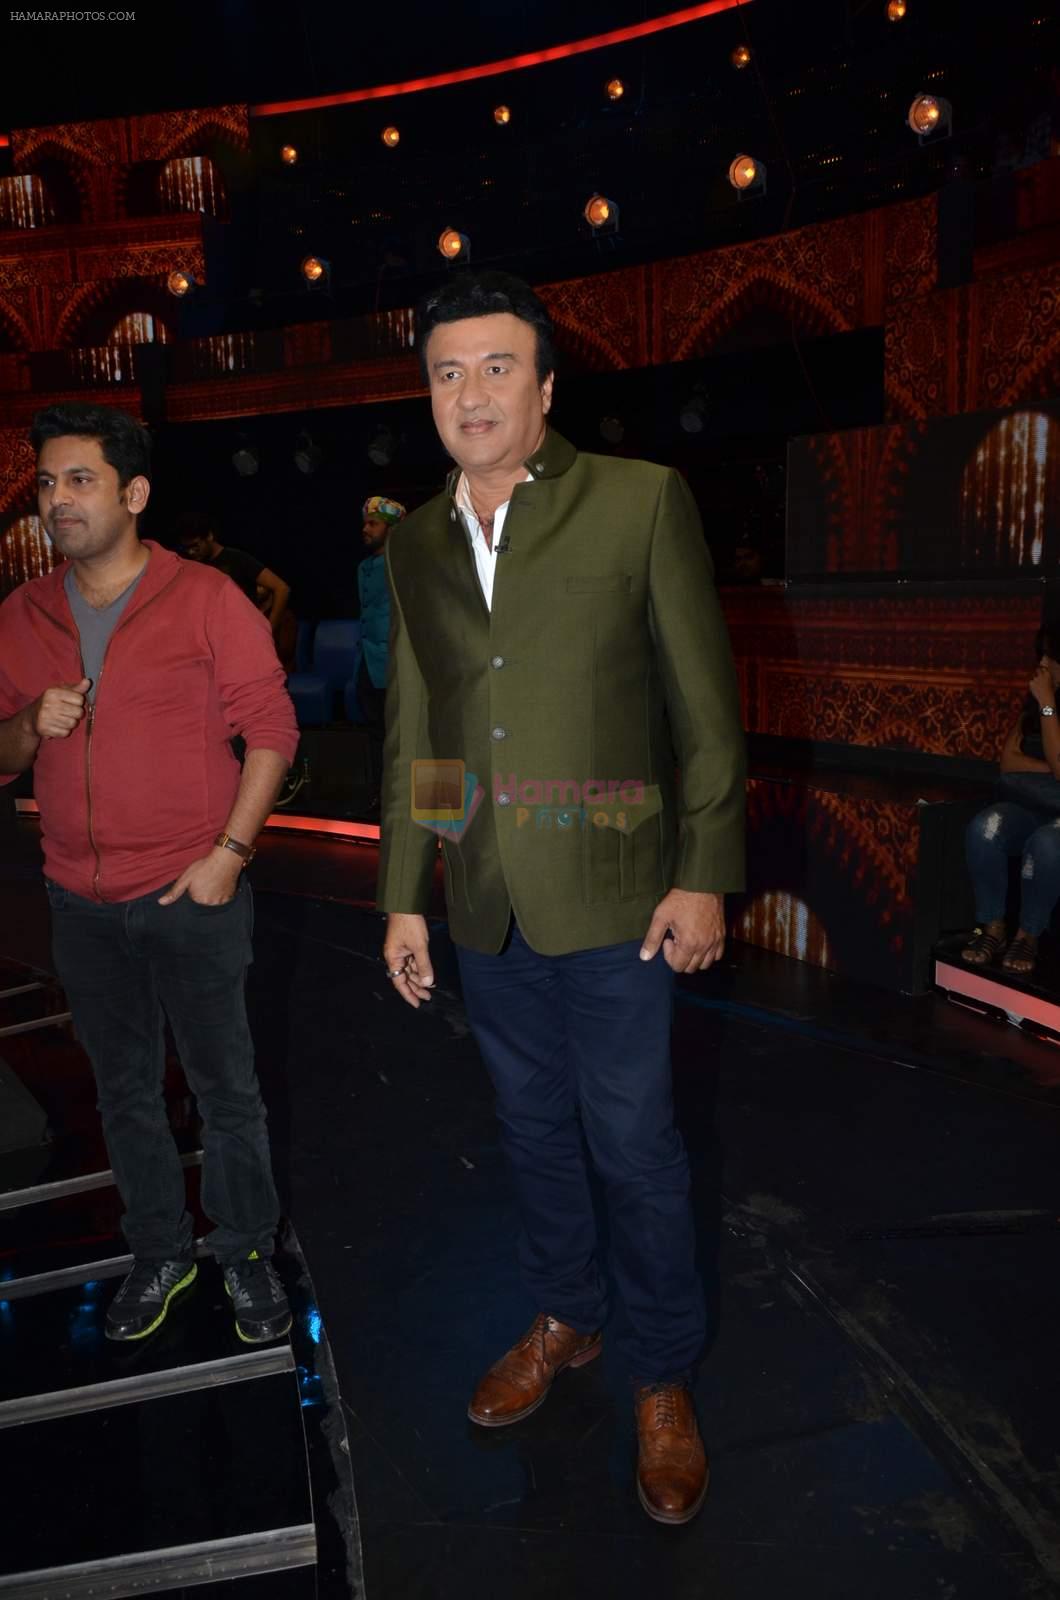 Anu Malik at Indian Idol episode special in Filmcity on 15th Sept 2015